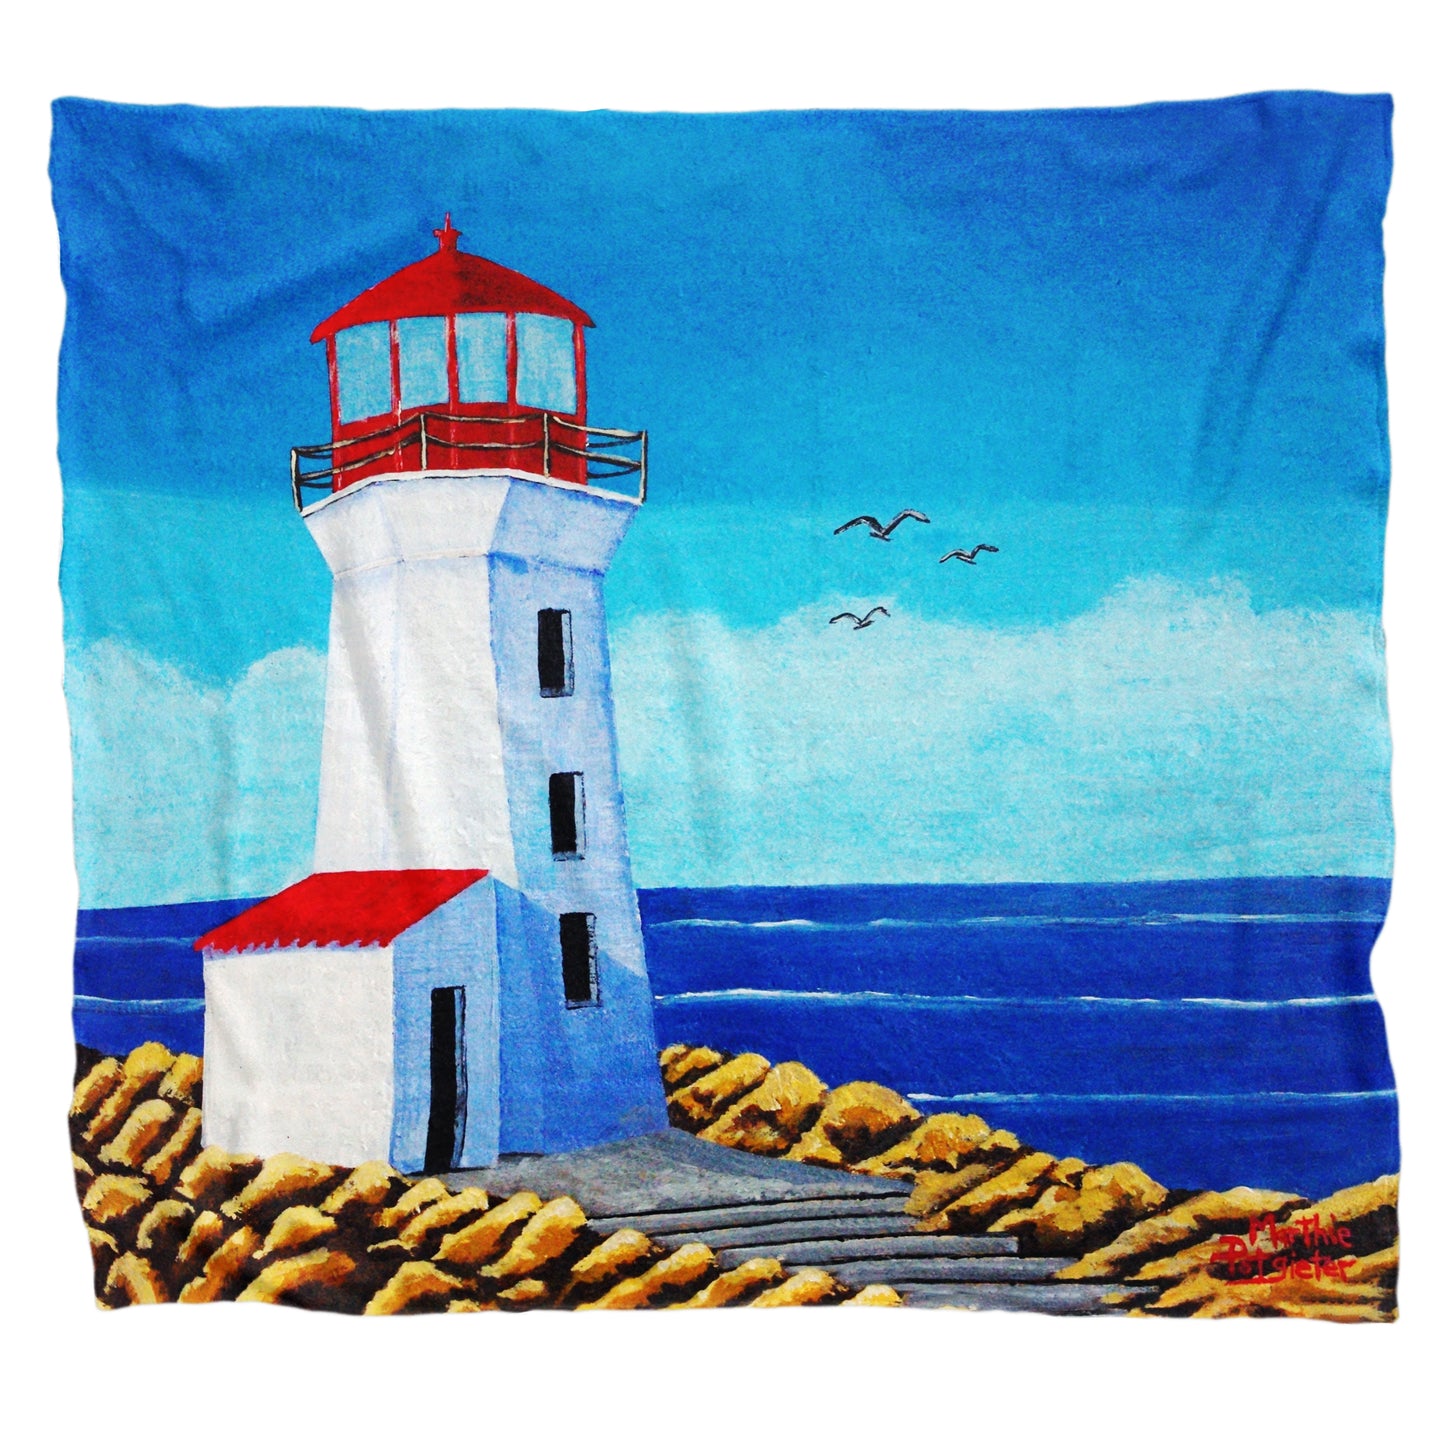 Red Roof Lighthouse Light Weight Fleece Blanket by Marthie Potgieter